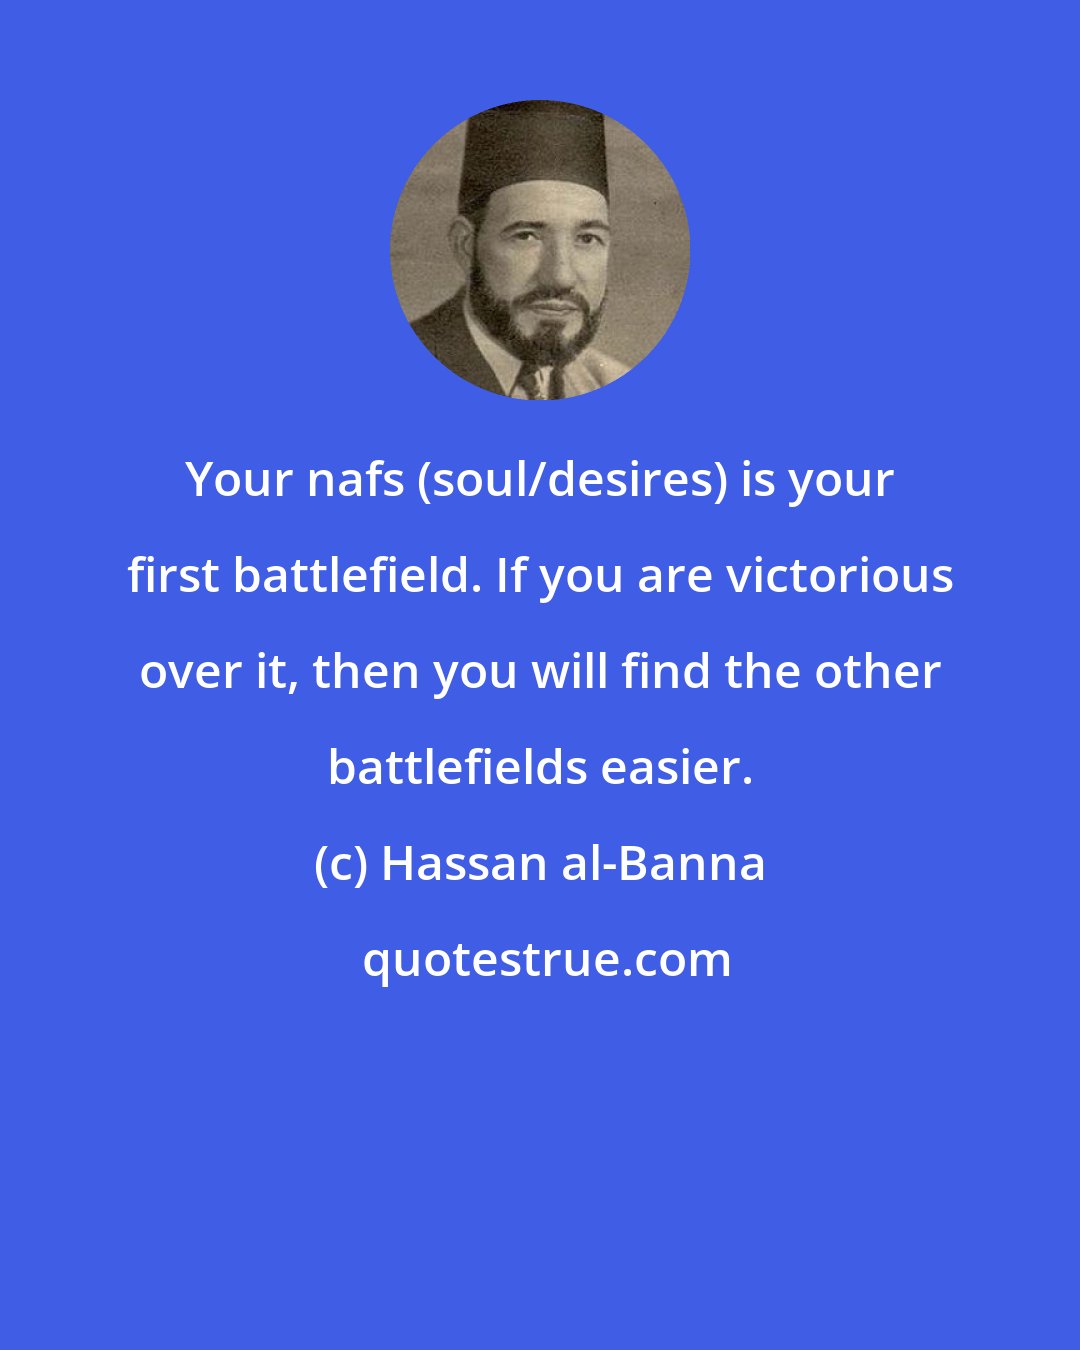 Hassan al-Banna: Your nafs (soul/desires) is your first battlefield. If you are victorious over it, then you will find the other battlefields easier.